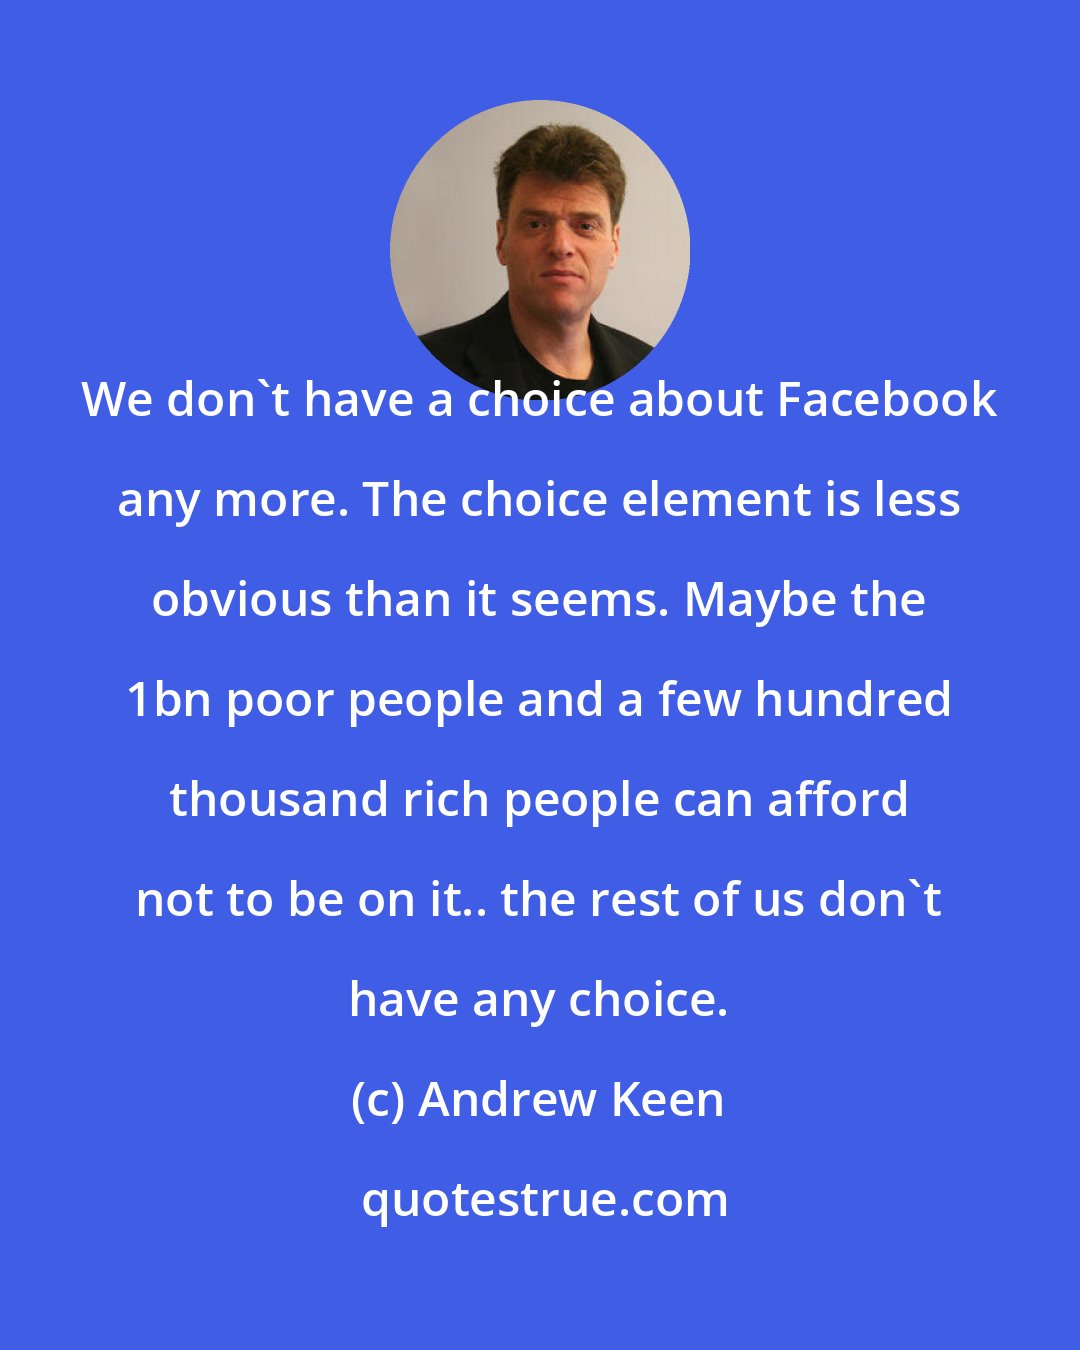 Andrew Keen: We don't have a choice about Facebook any more. The choice element is less obvious than it seems. Maybe the 1bn poor people and a few hundred thousand rich people can afford not to be on it.. the rest of us don't have any choice.